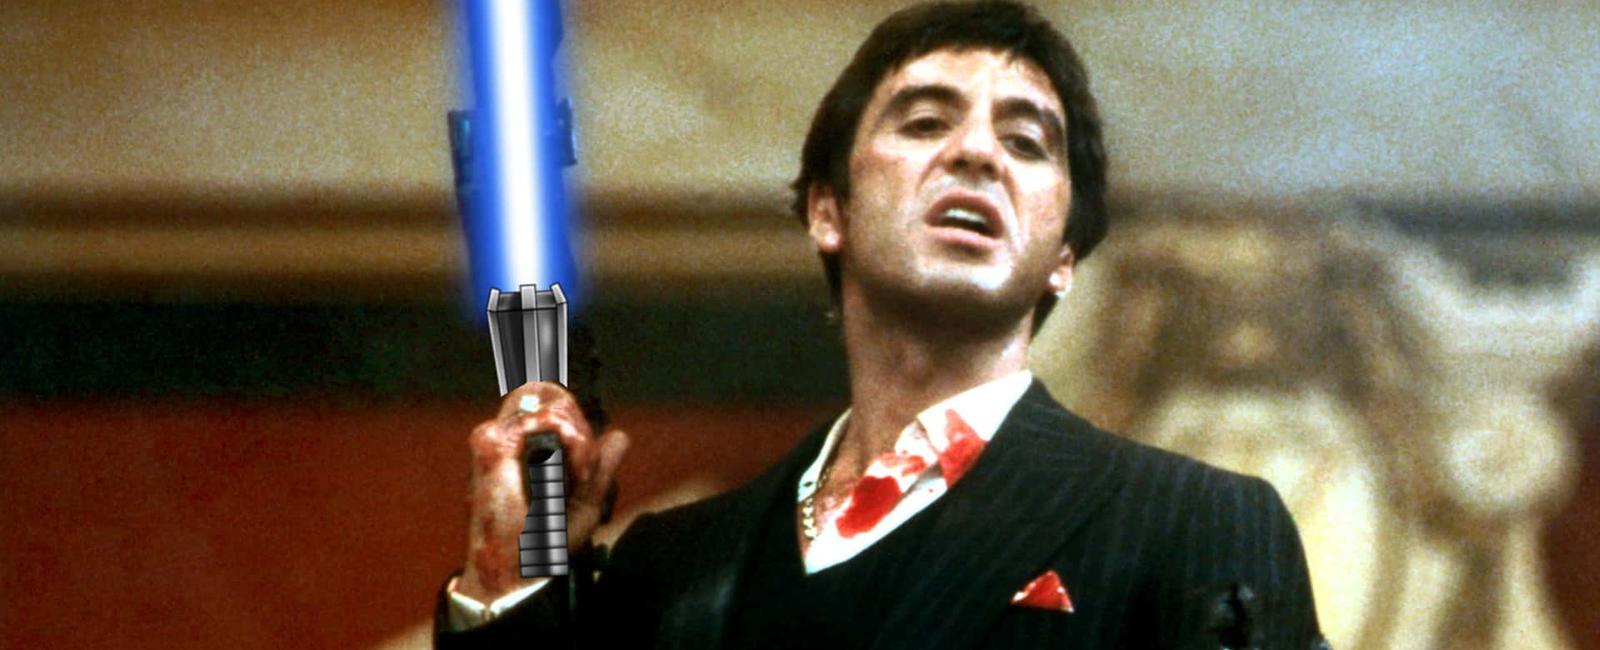 Al pacino was george lucas first pick to play han solo in star wars pacino turned the role down because he thought the script was too confusing